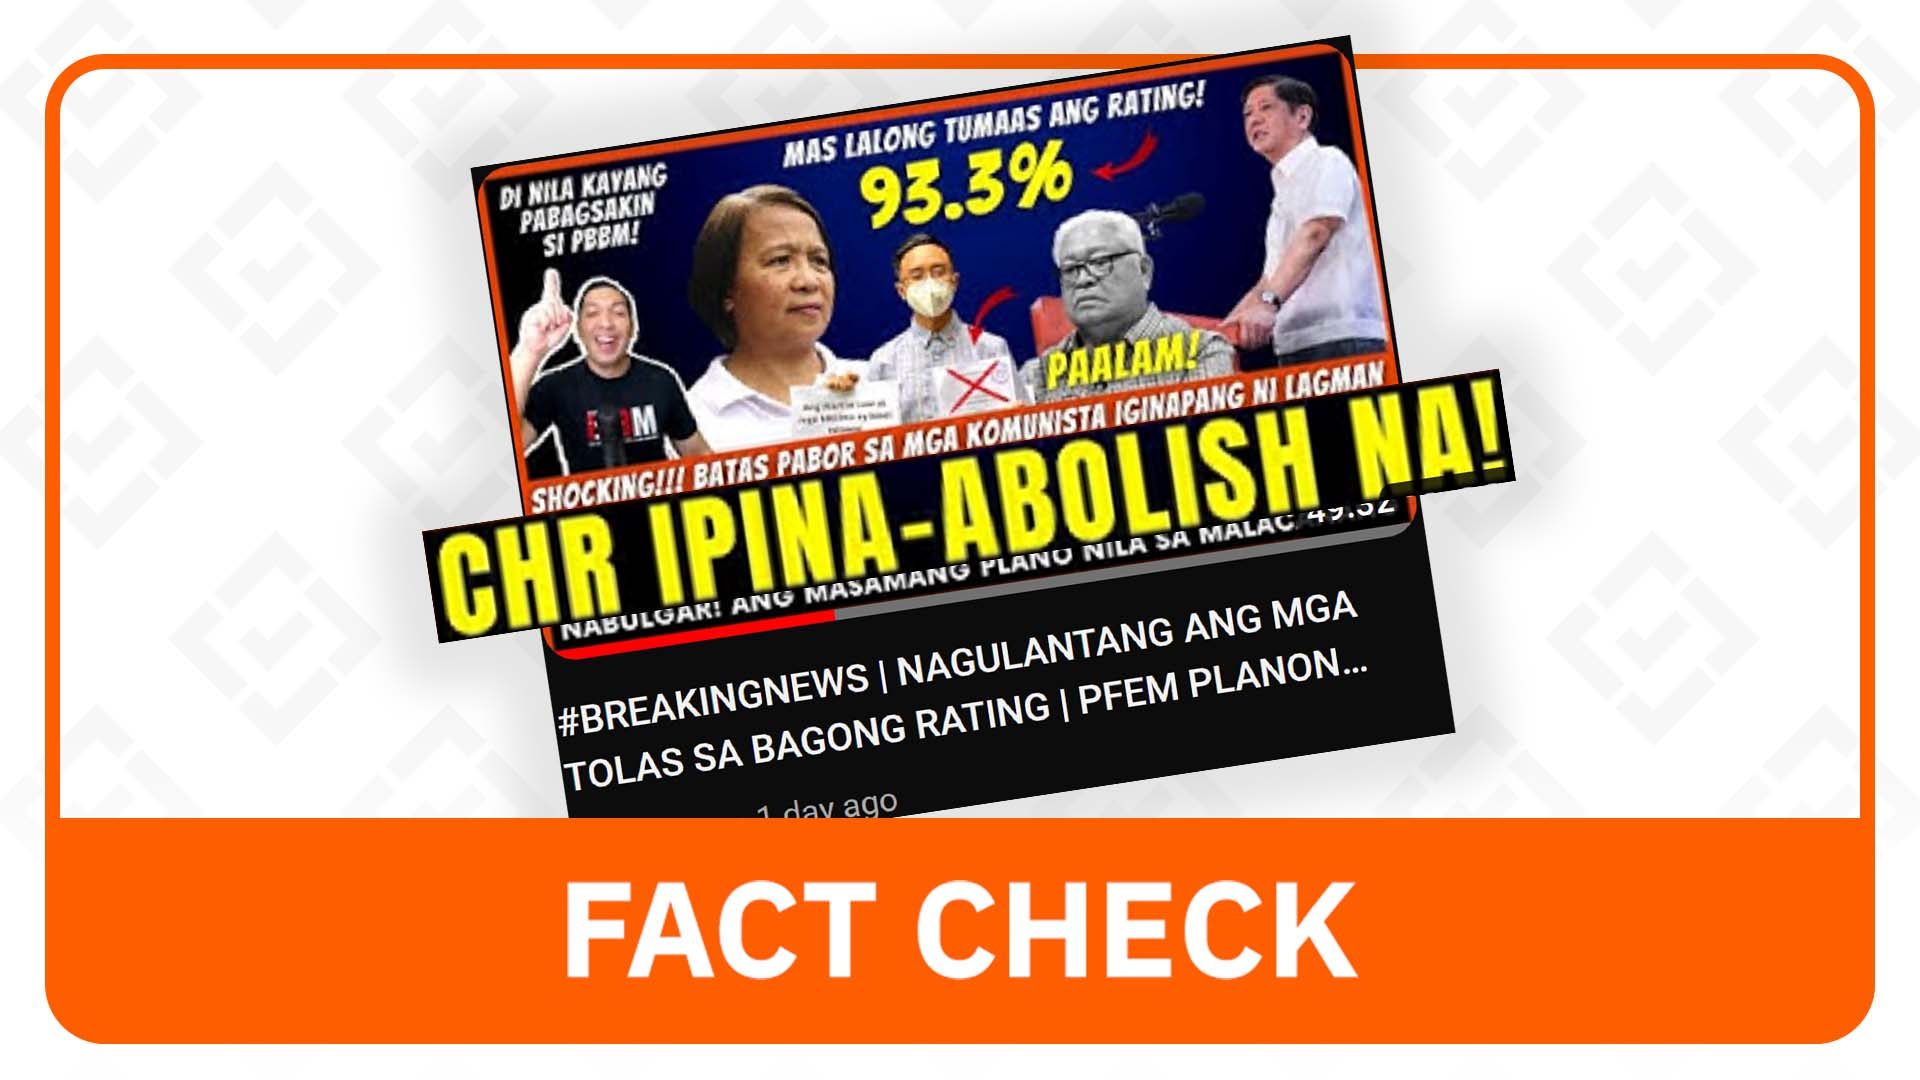 FACT CHECK: The PH gov’t is not abolishing the Commission on Human Rights